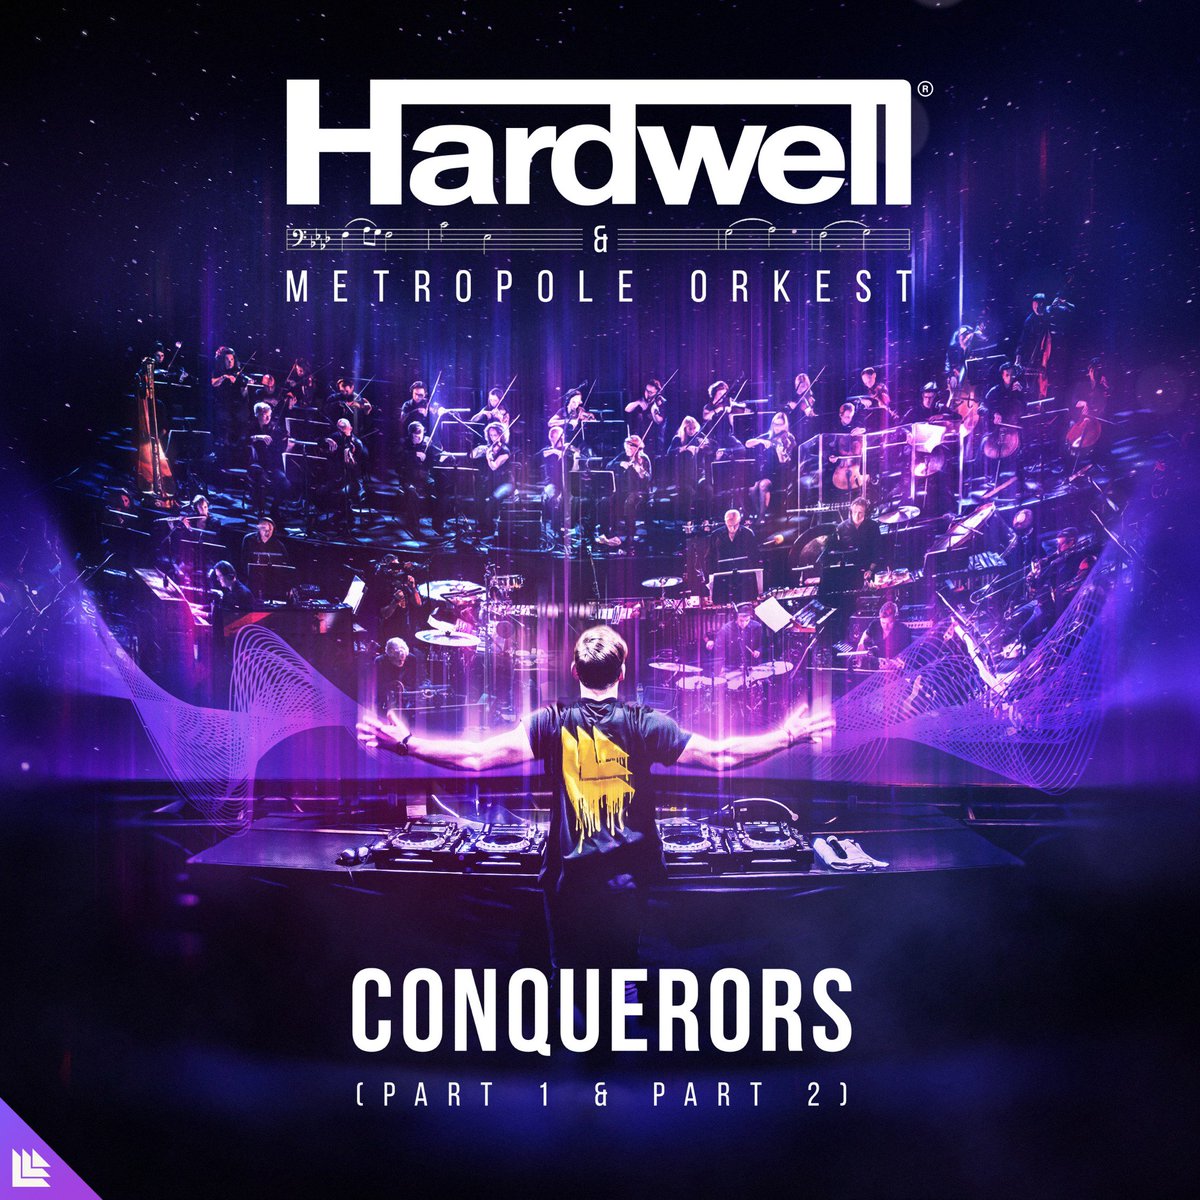 My new track "Conquerors" with the @MetropoleOrkest is coming out tomorrow! https://t.co/DMq88GG3J9